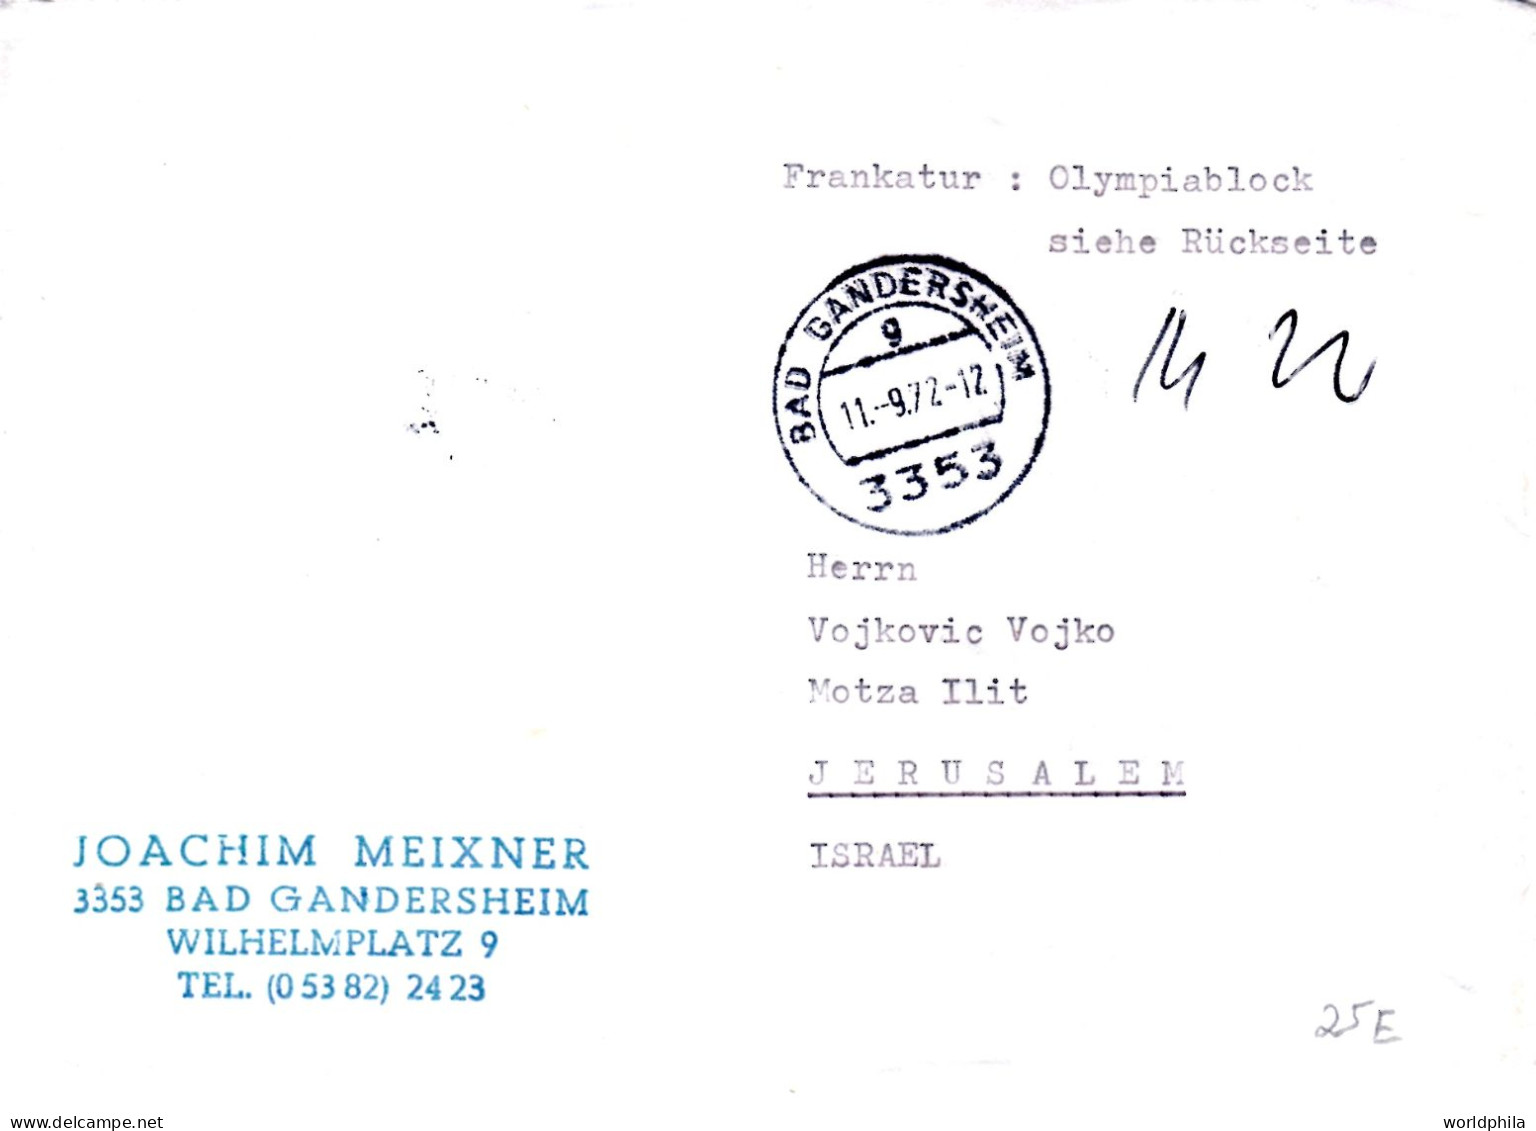 Deutschland To Israel 1972 Olympic Games Olympiablock Mi#7 Mailed Cover I - Sommer 1972: München